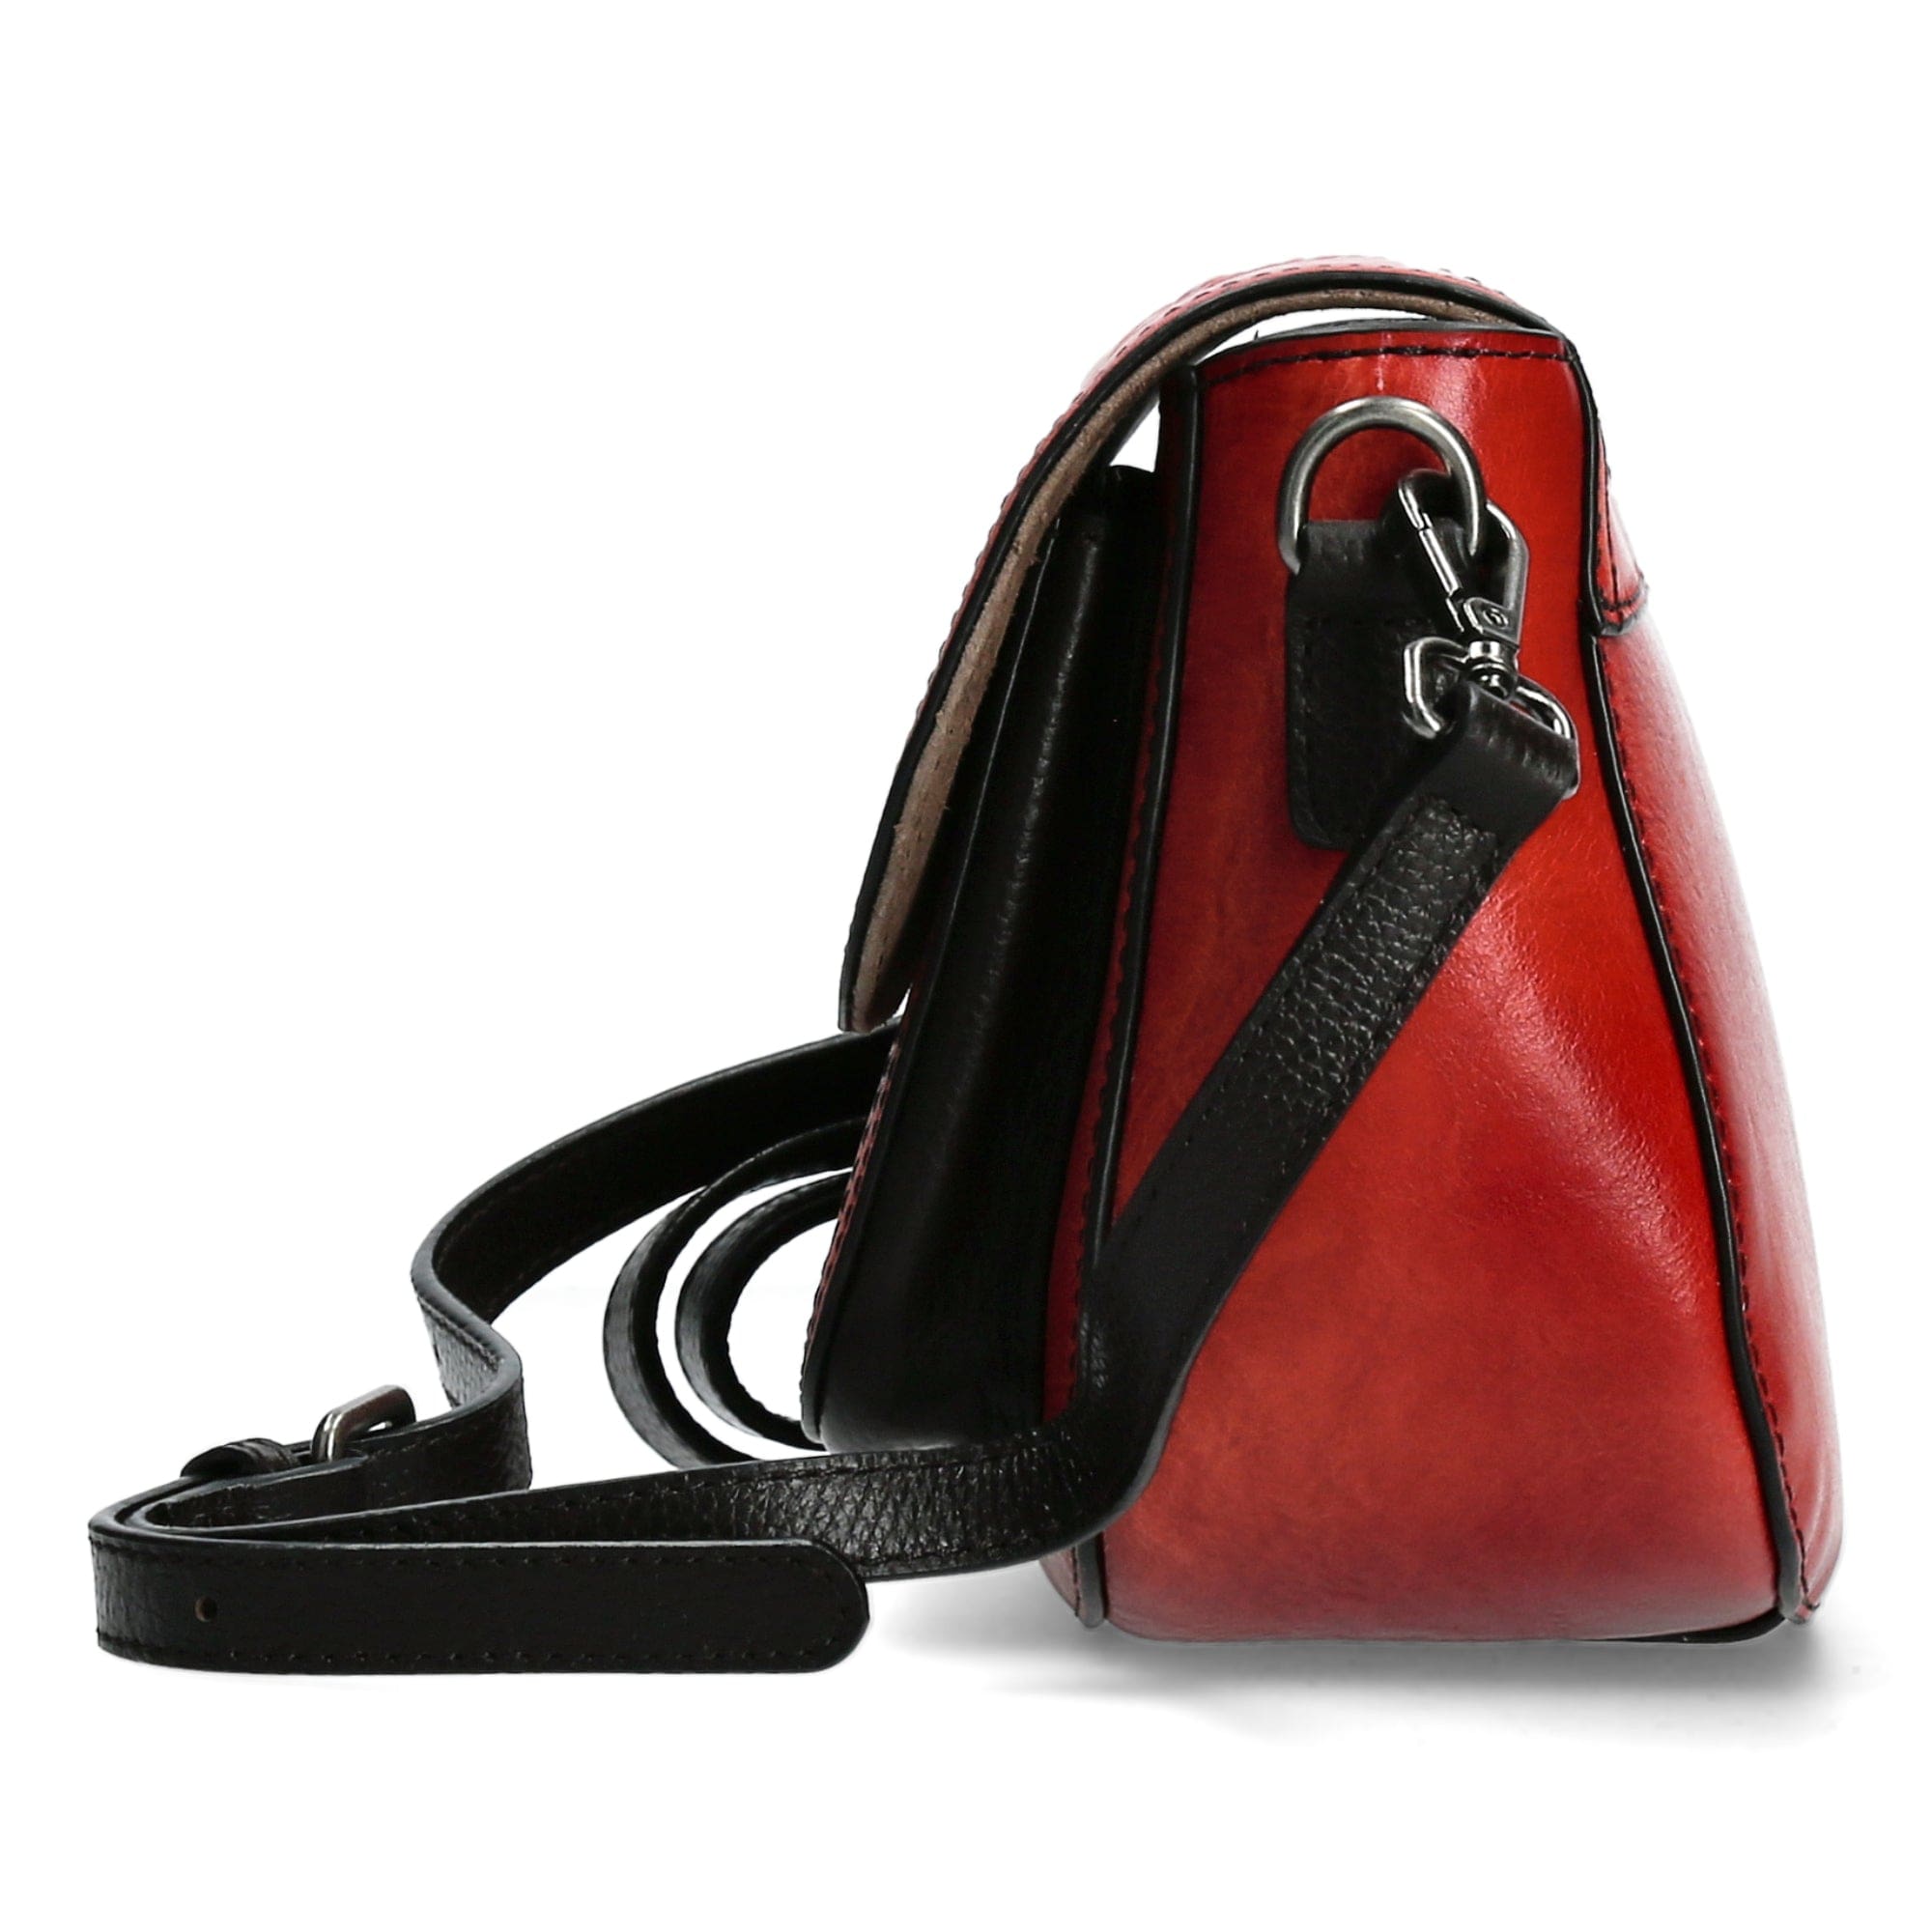 Nelly Exclusivity leather bag - Bag